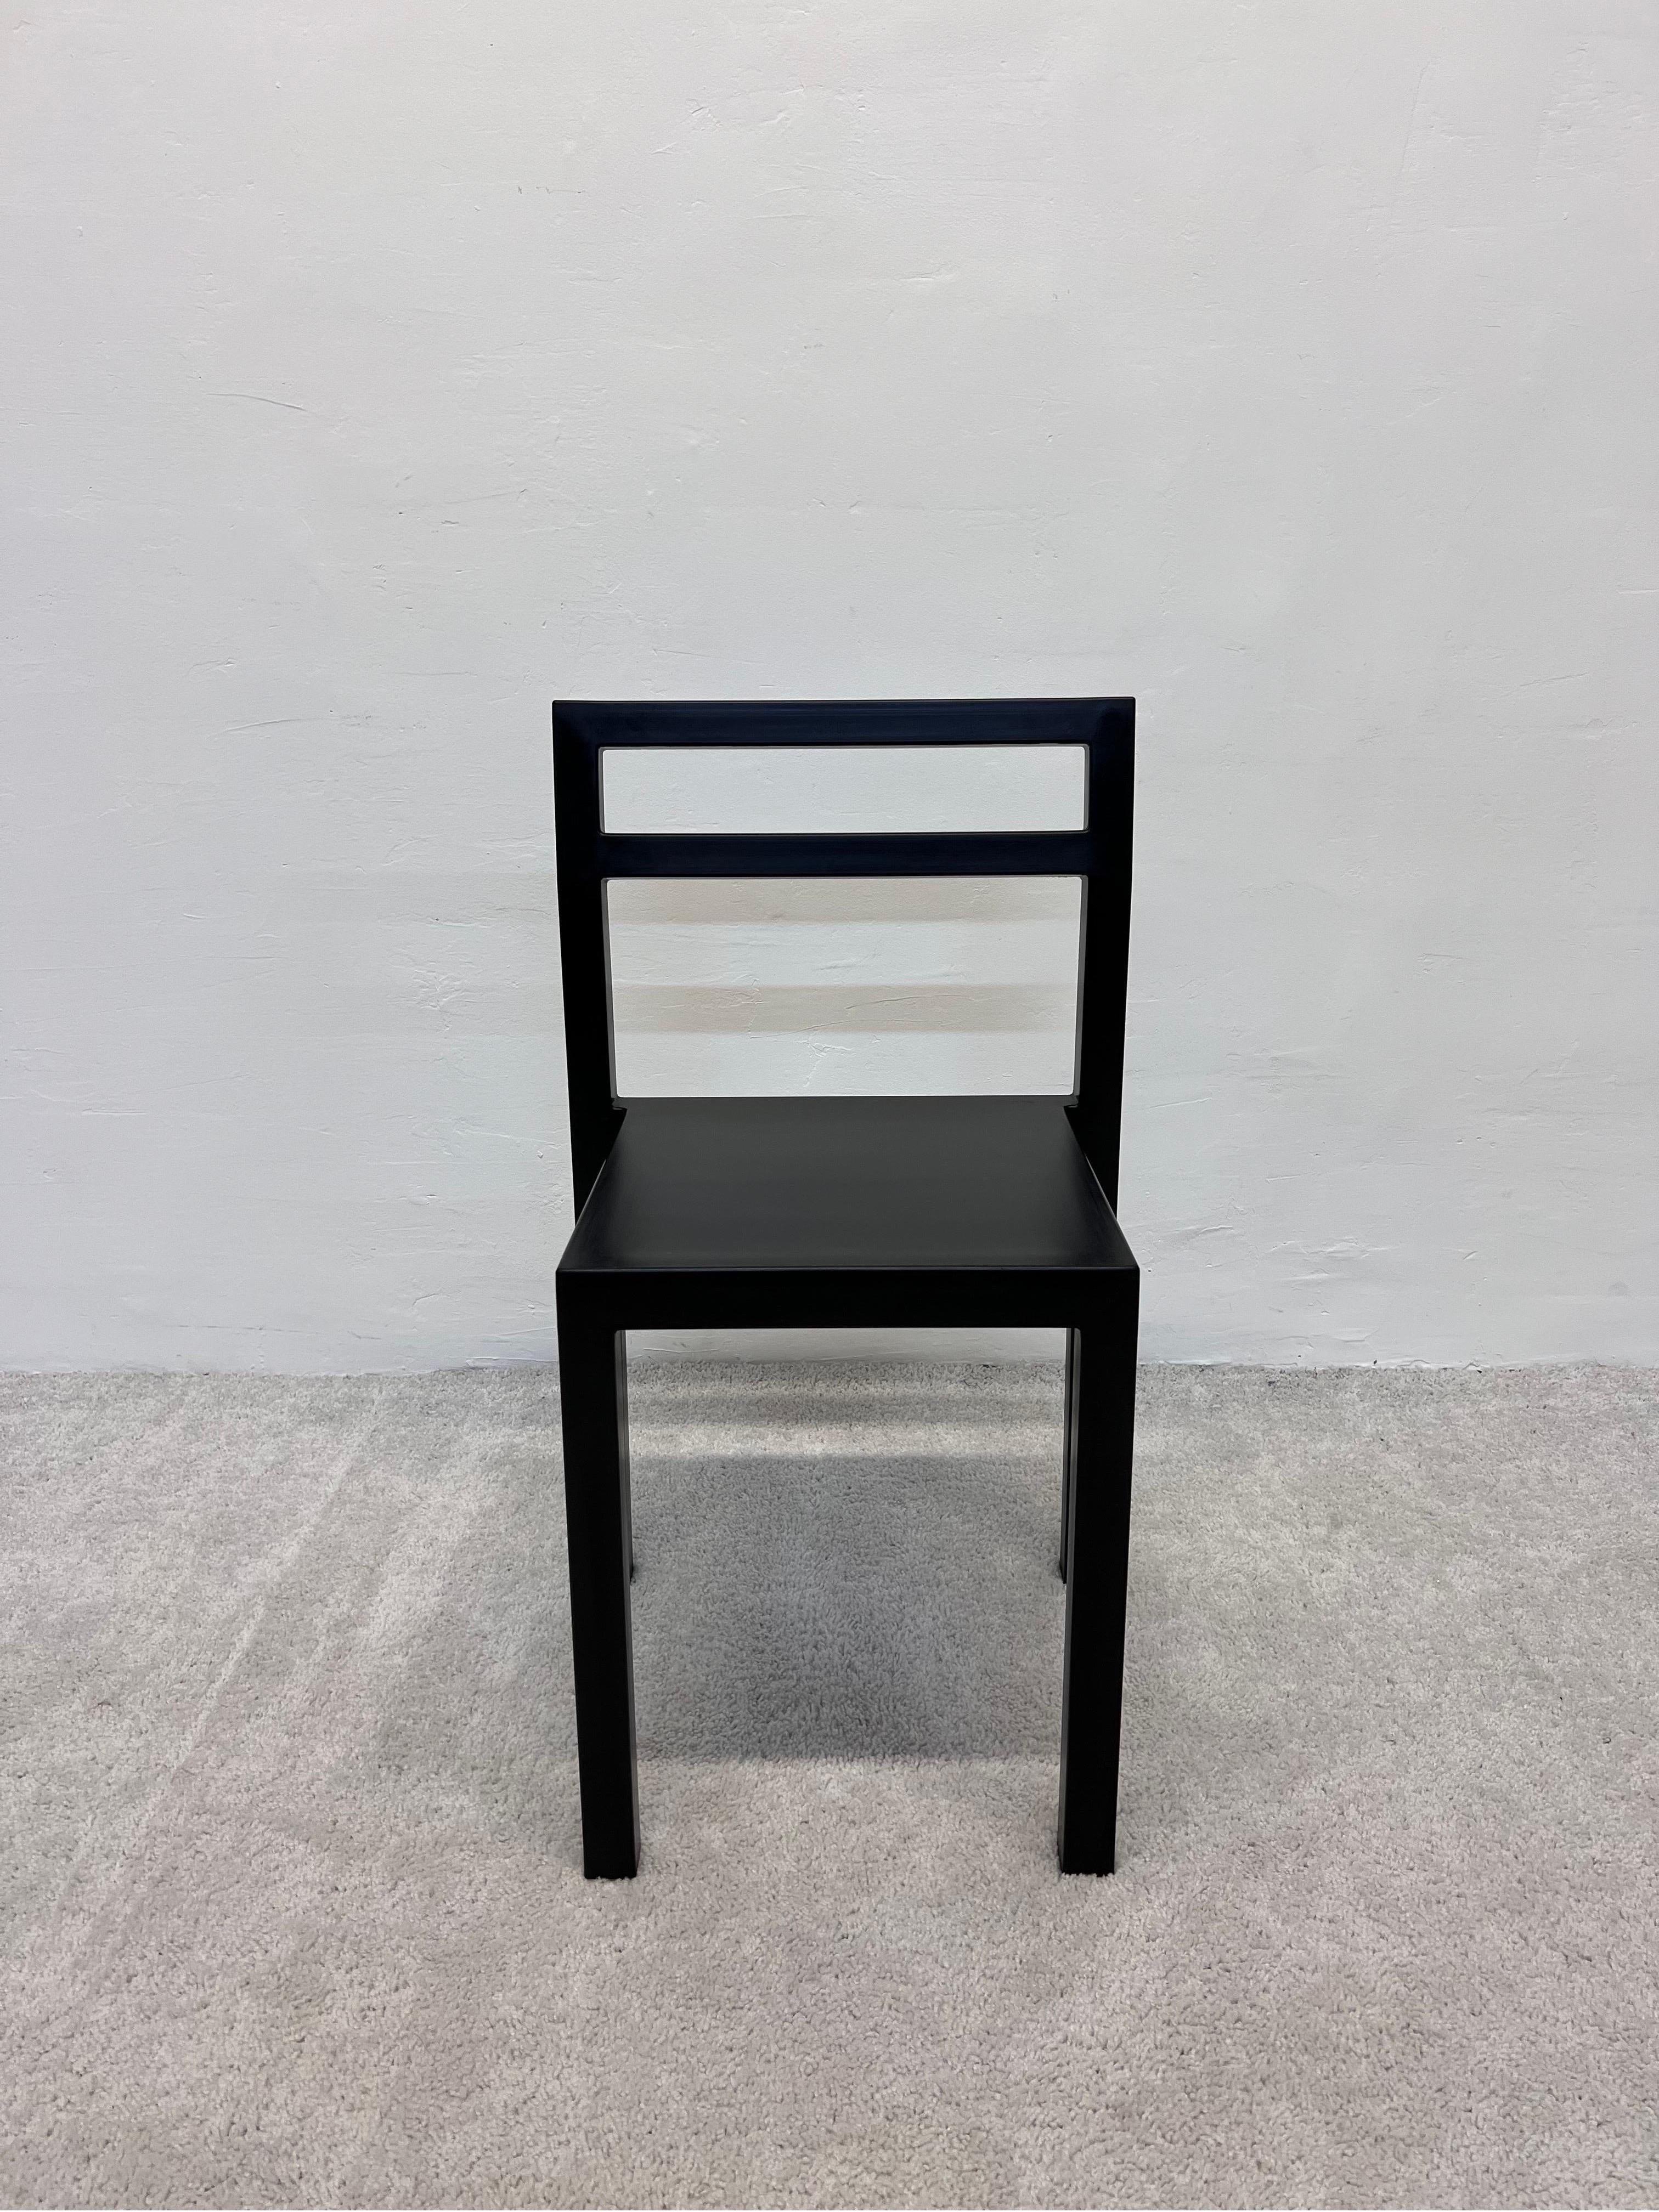 NON chair in black PUR-Rubber over a steel frame designed by Boris Berlin and Paul Christensen for Kallemo AB Sweden.

NON is a monoblock chair moulded in PUR-rubber in one shot. Geometrically straight yet comfortable, thanks to the softness of